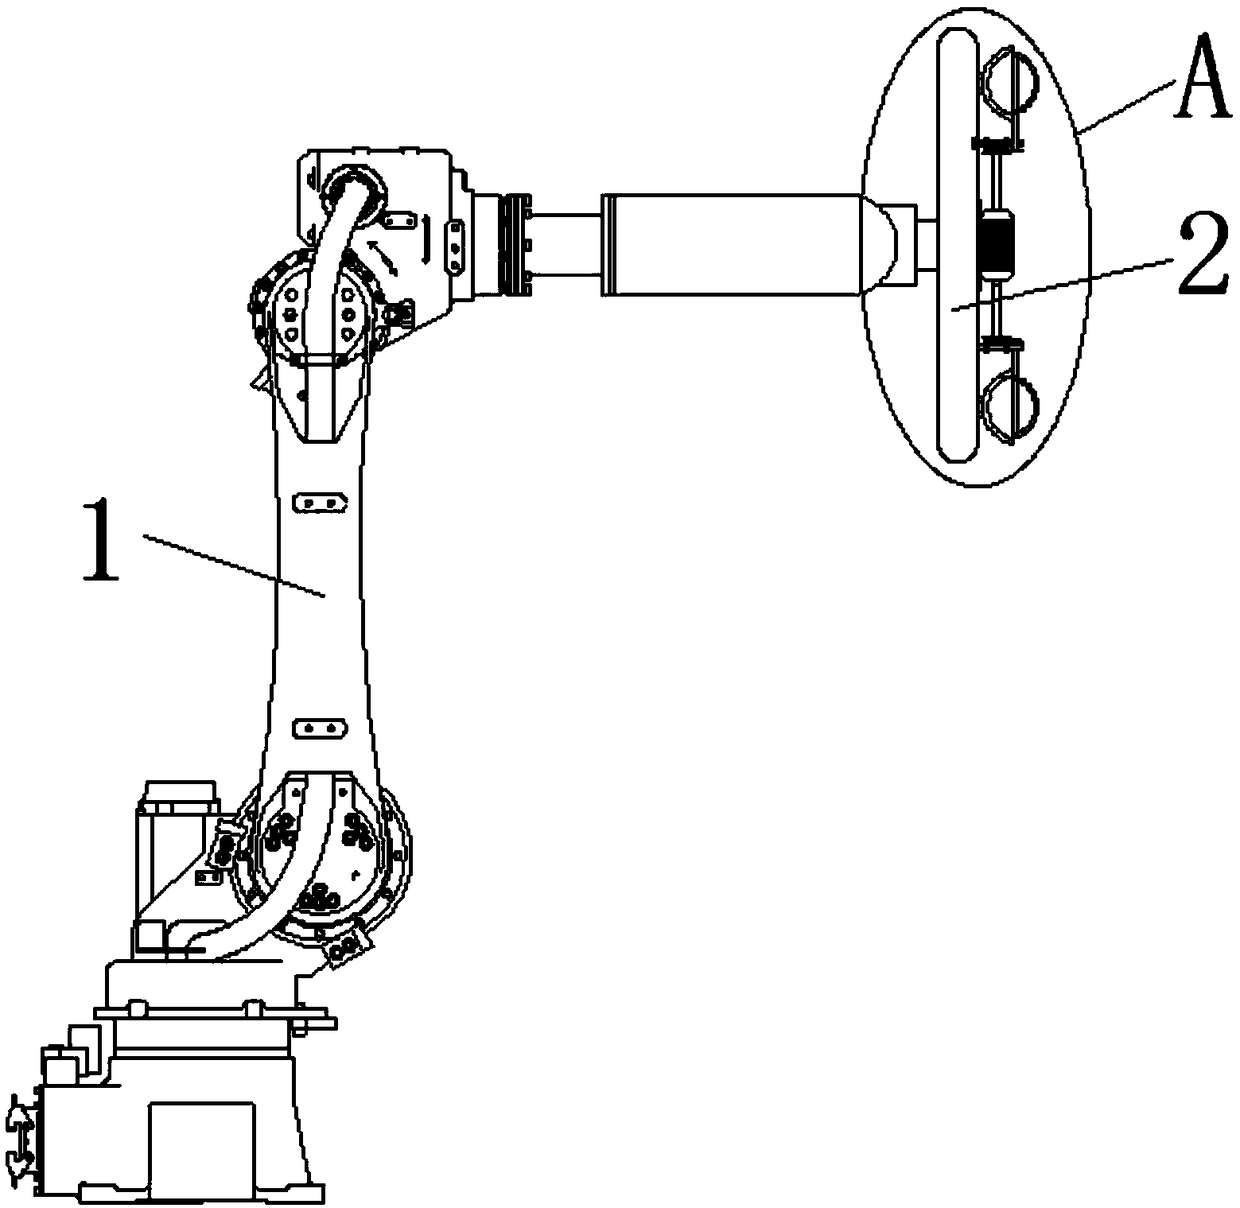 Six-axis joint robot for loading and unloading